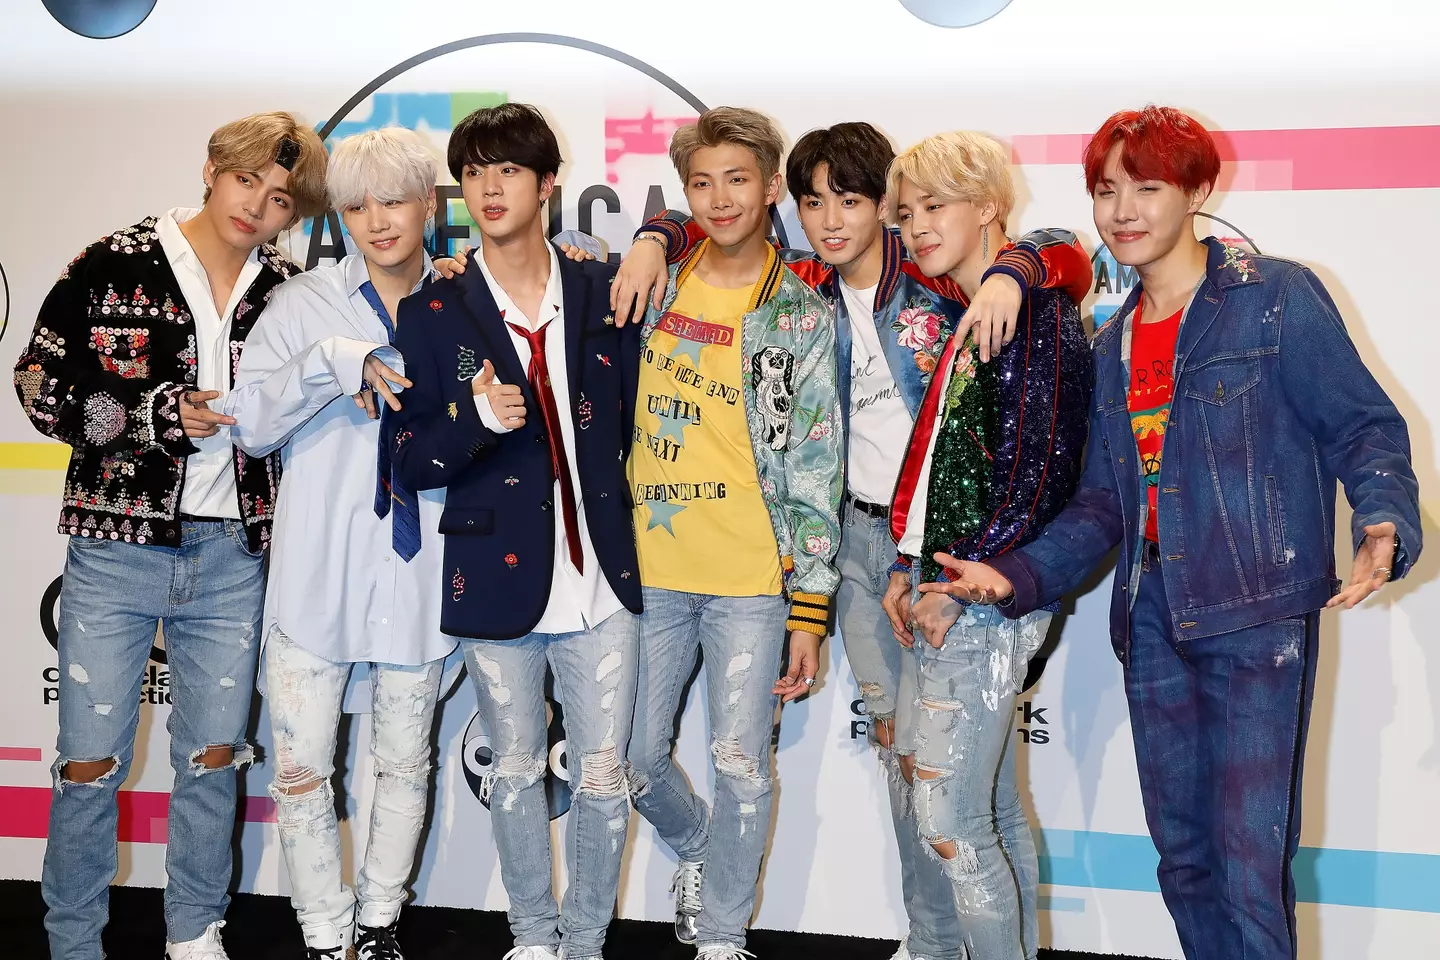 It was first announced earlier this month that South Korea’s military wanted to conscript K-pop band BTS into the army.